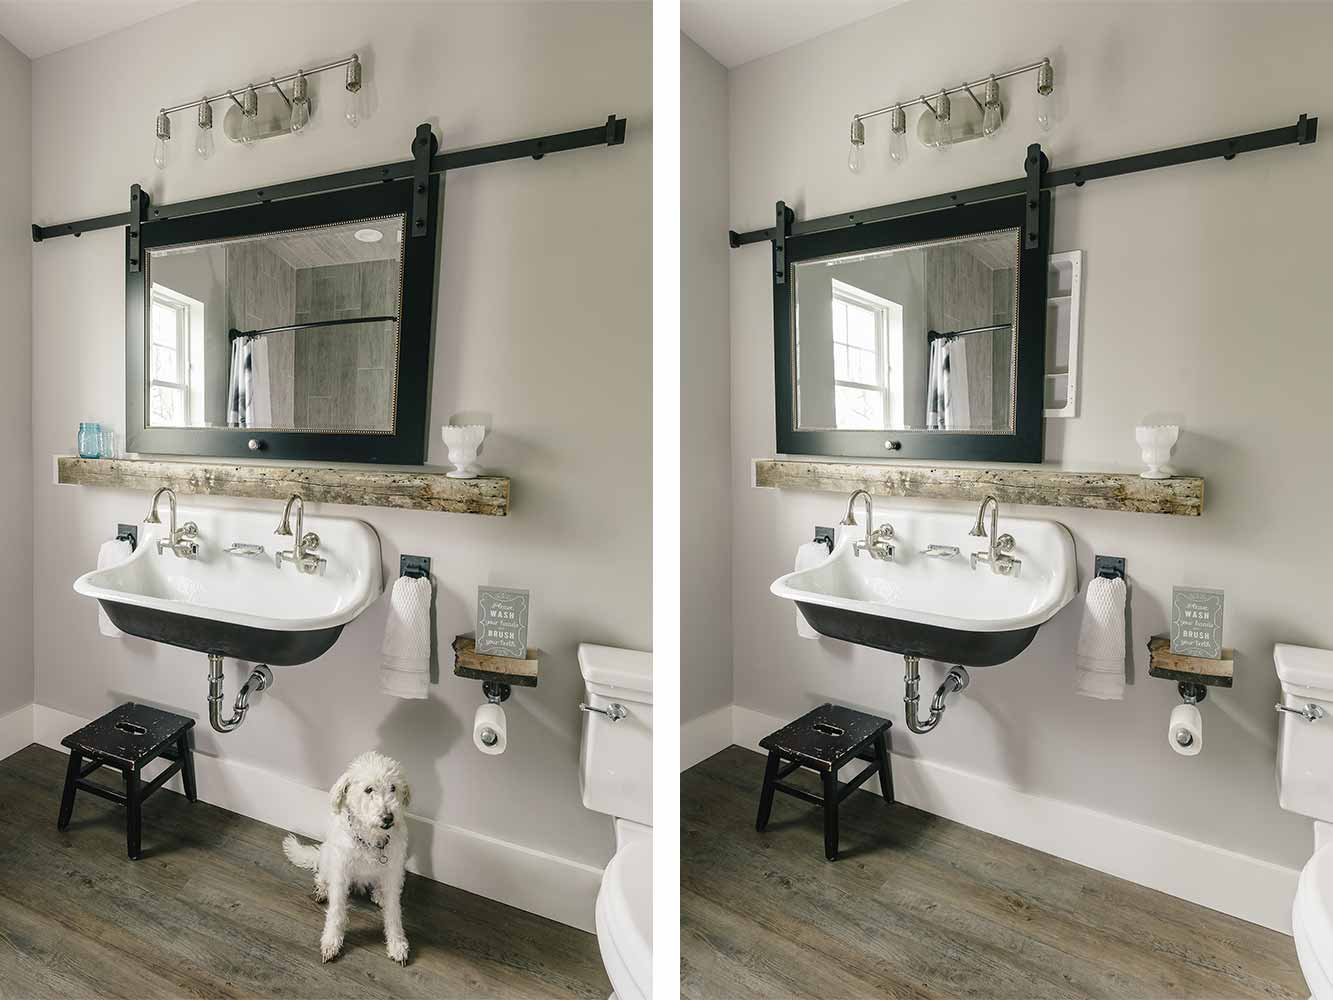 Industrial farmhouse style custom new home in St. Charles, Iowa designed and built by Silent Rivers of Des Moines features a hall bathroom with wall mounted utility sink below salvaged wood shelf, luxury vinyl plank flooring and a sliding medicine cabinet